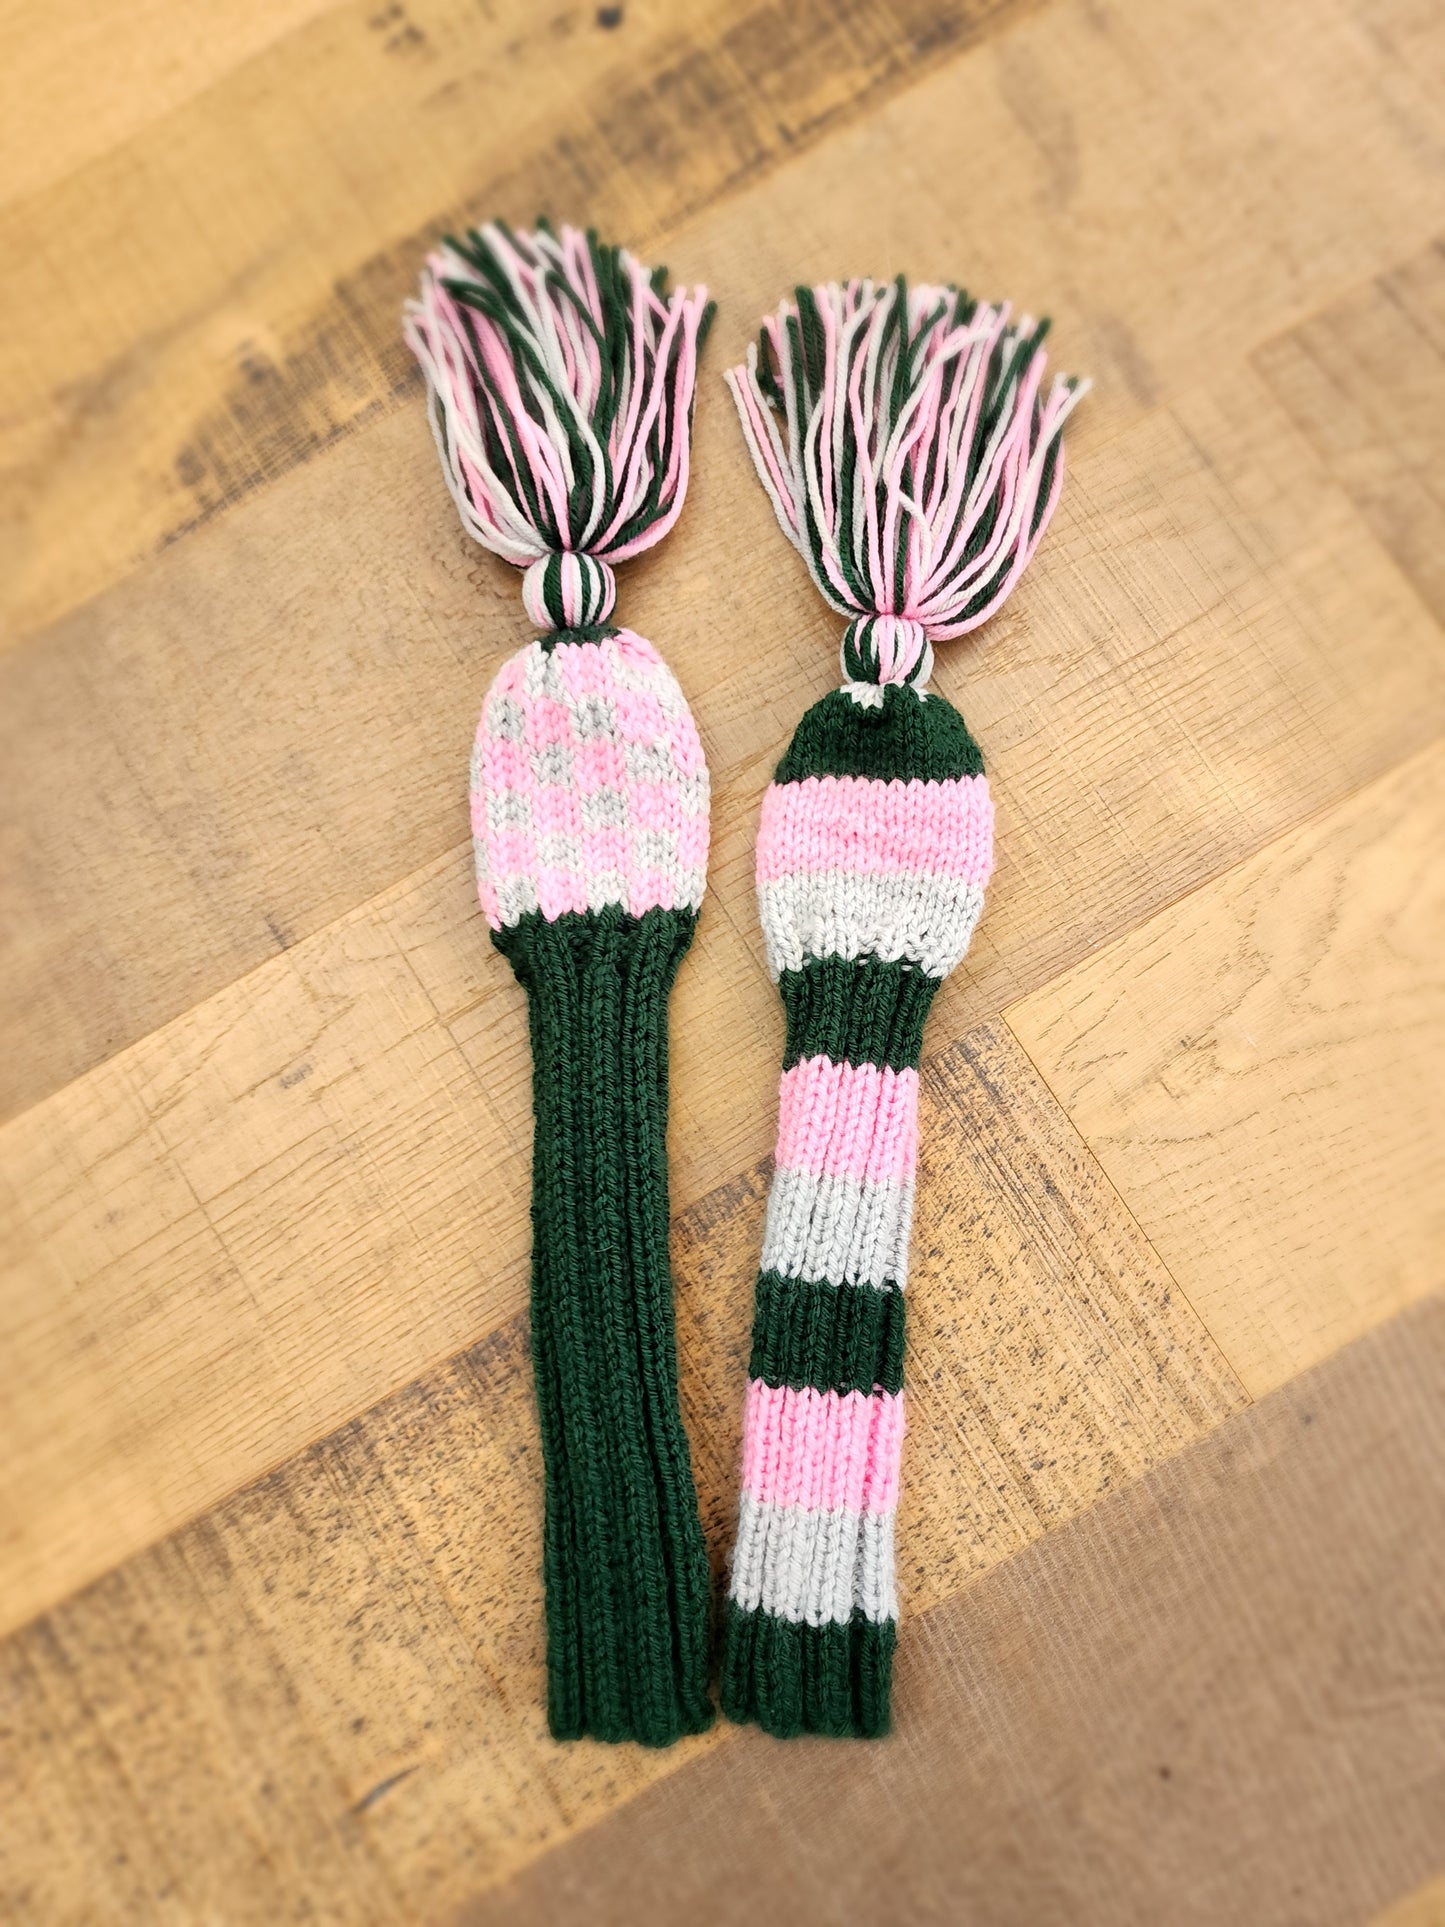 Two Golf Club Head Covers Retro-Vintage Pink, Green & Gray with Tassels for Fairway Woods - Austinknittylimits